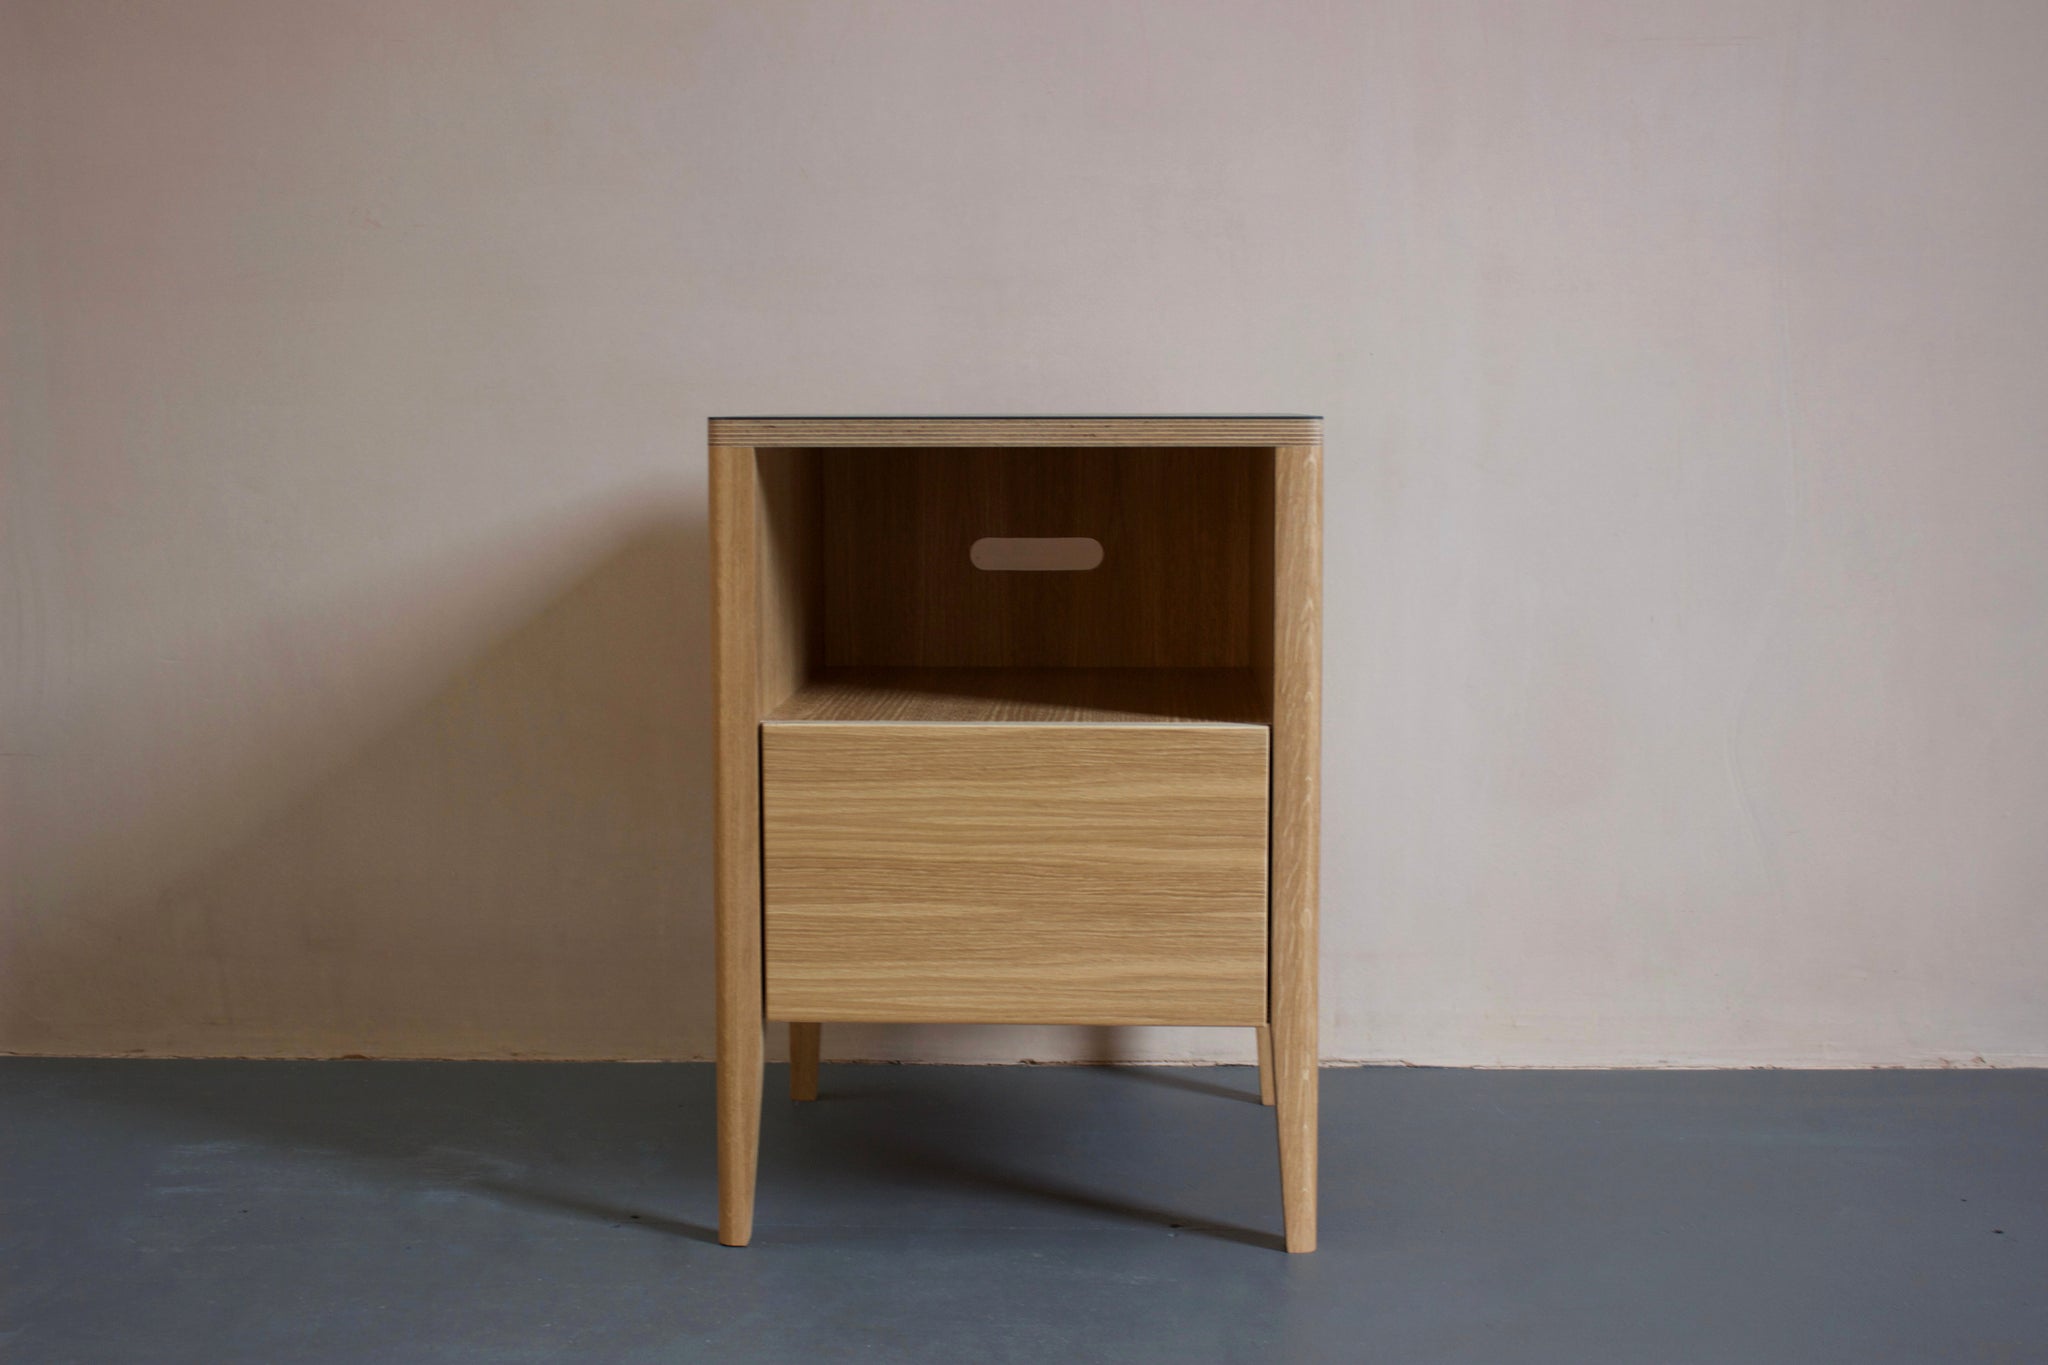 The Huxley bedside table in oak veneer plywood with Forbo linoleum top and solid oak legs. Designed and made by Jon Grant London in Leyton, East London.